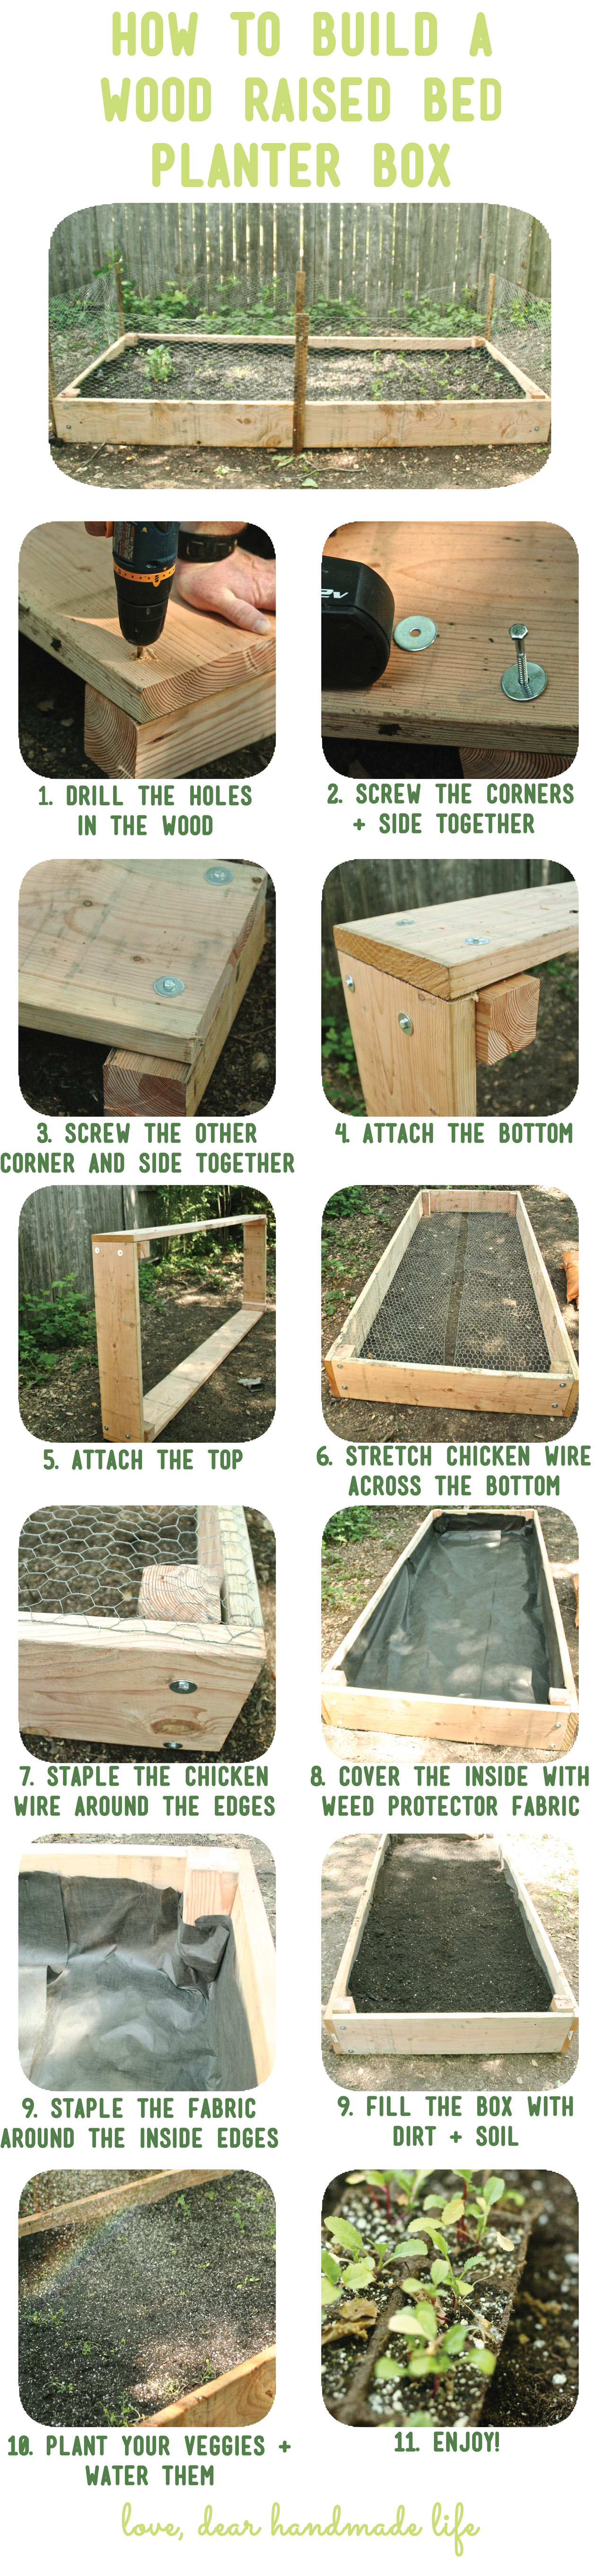 how to build a wooden raised bed planter box